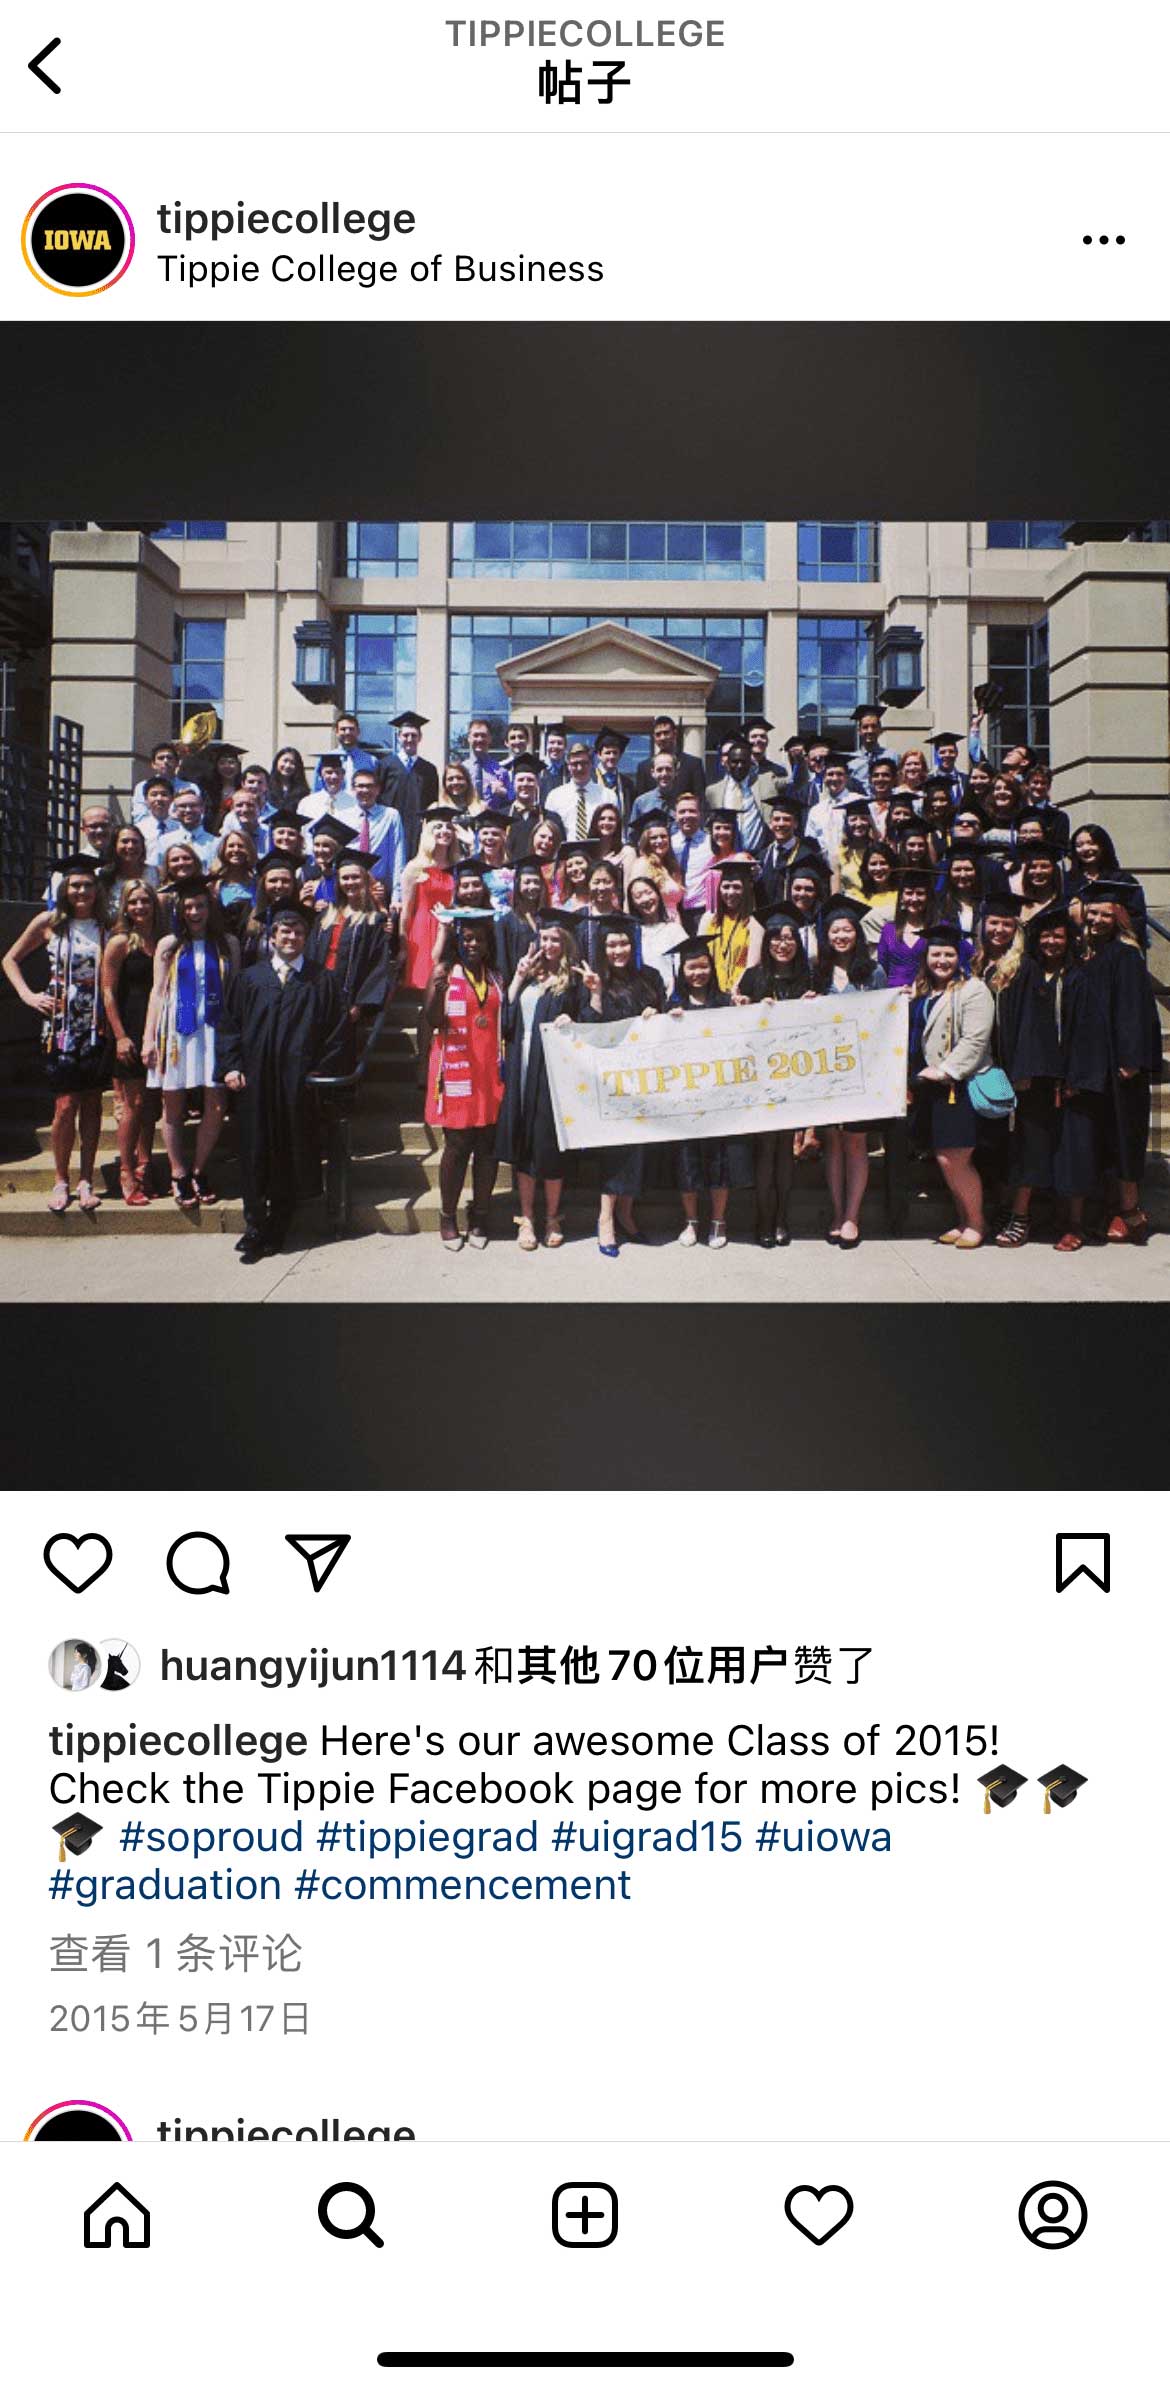 Tippie College of Business social media post from 2015 with graduating class on steps